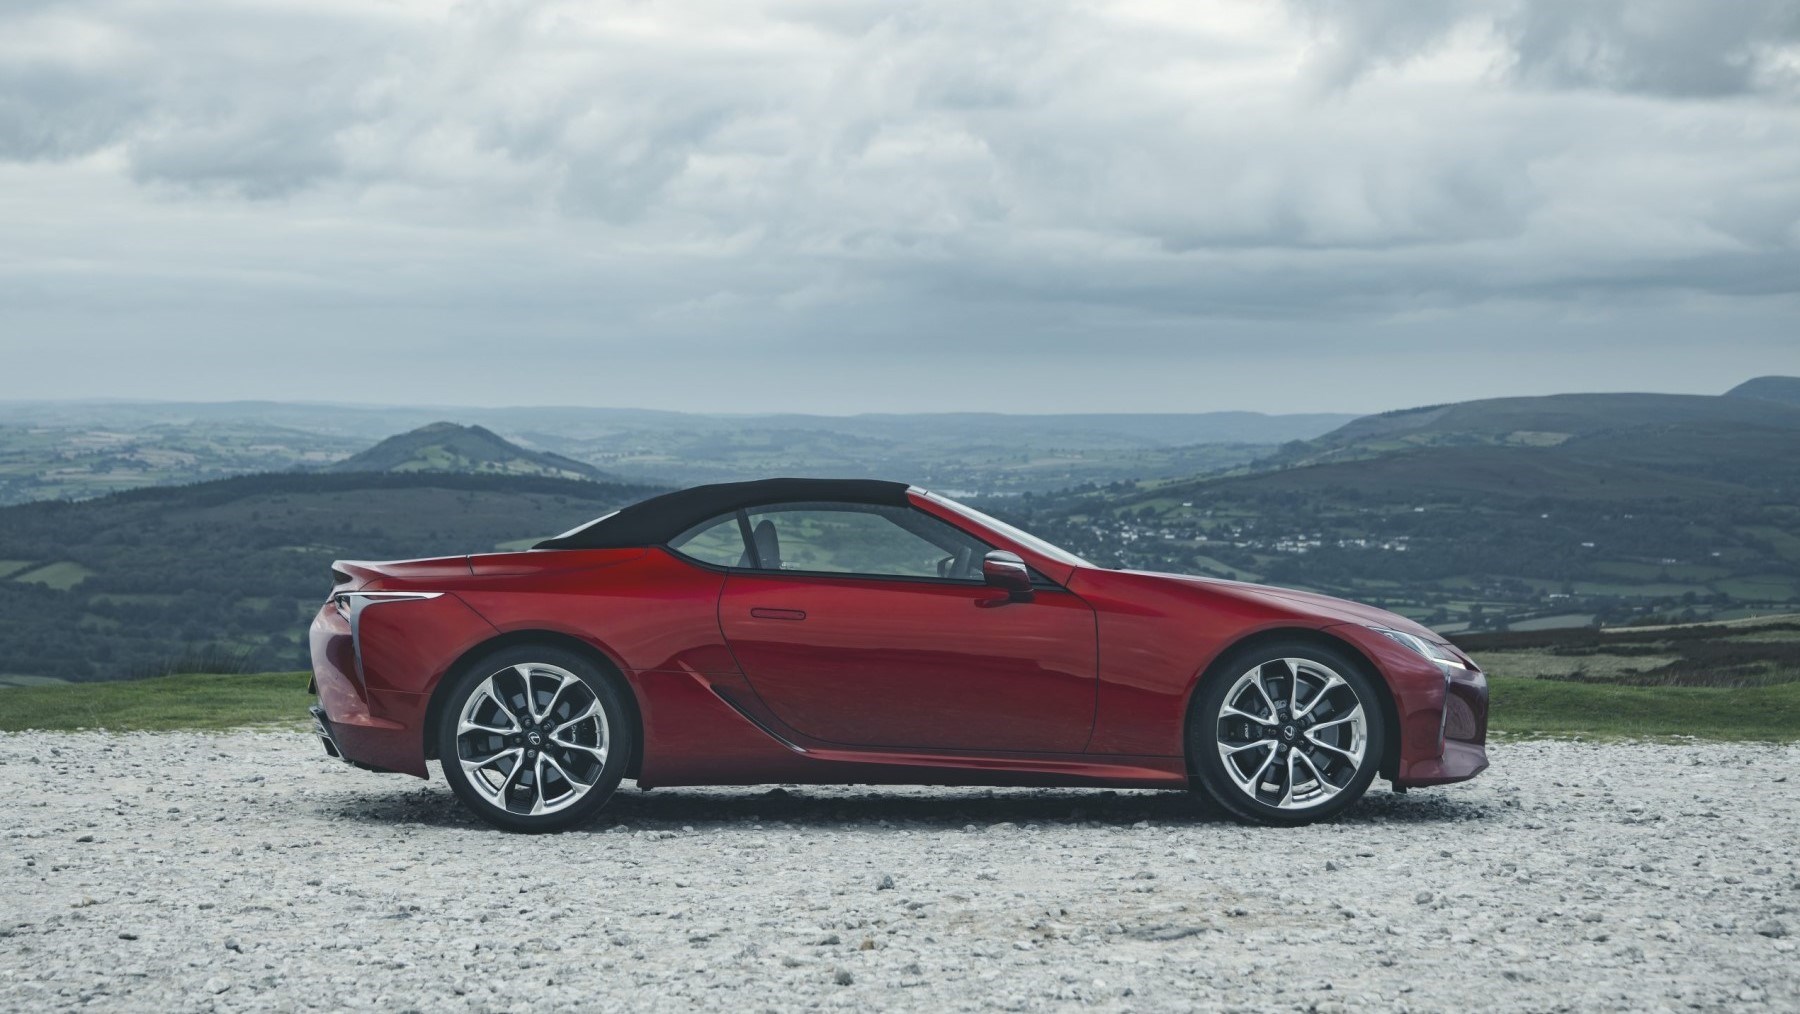 2020 Lexus LC Convertible - side, roof up